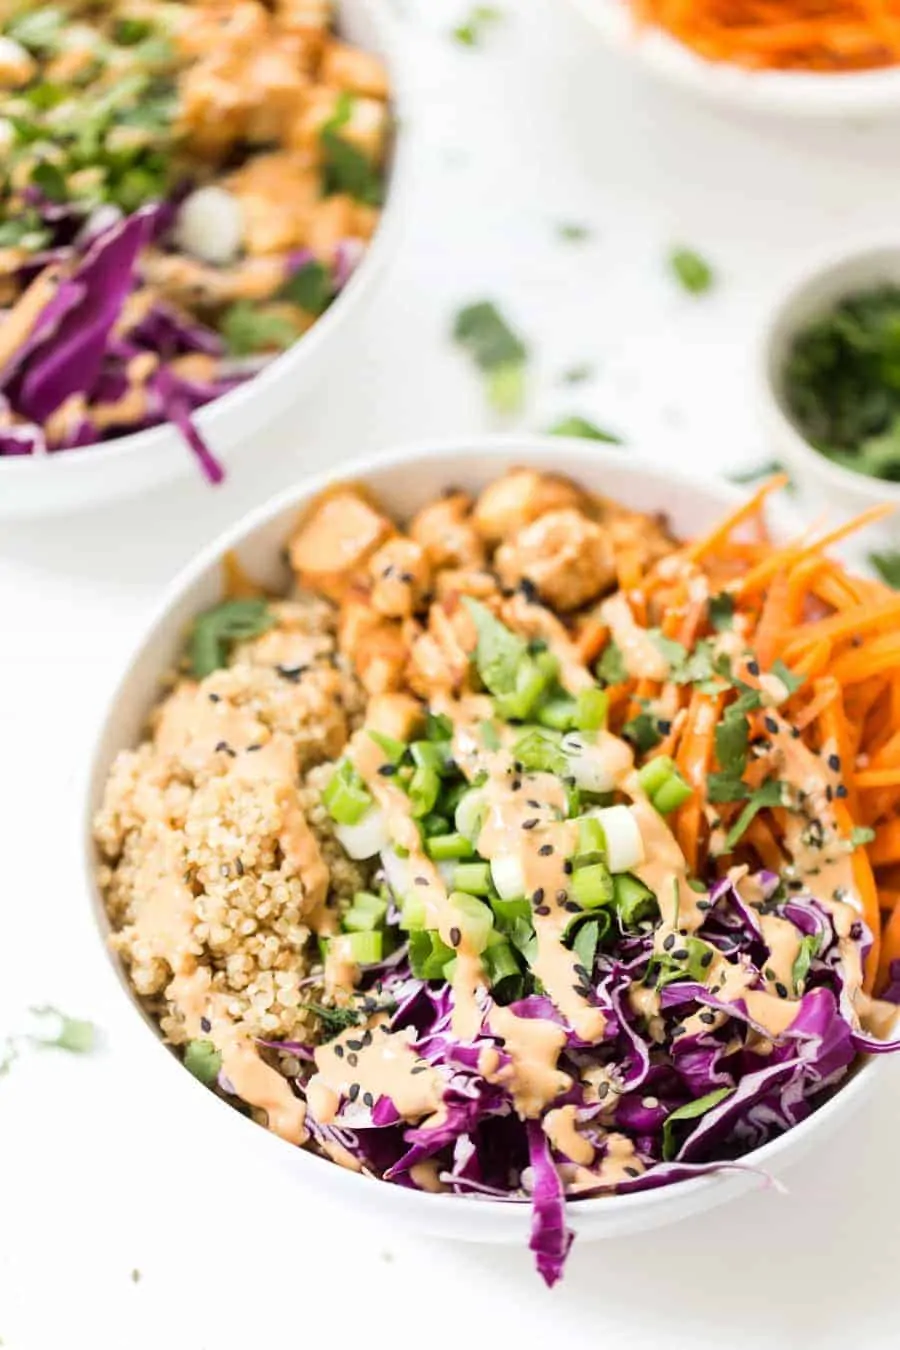 Kick your dinner up a notch with these Asian Quinoa Bowls! Combining fluffy ginger quinoa, crunchy veggies, crispy baked tofu and a creamy peanut sauce, it's flavorful, healthy and delish!